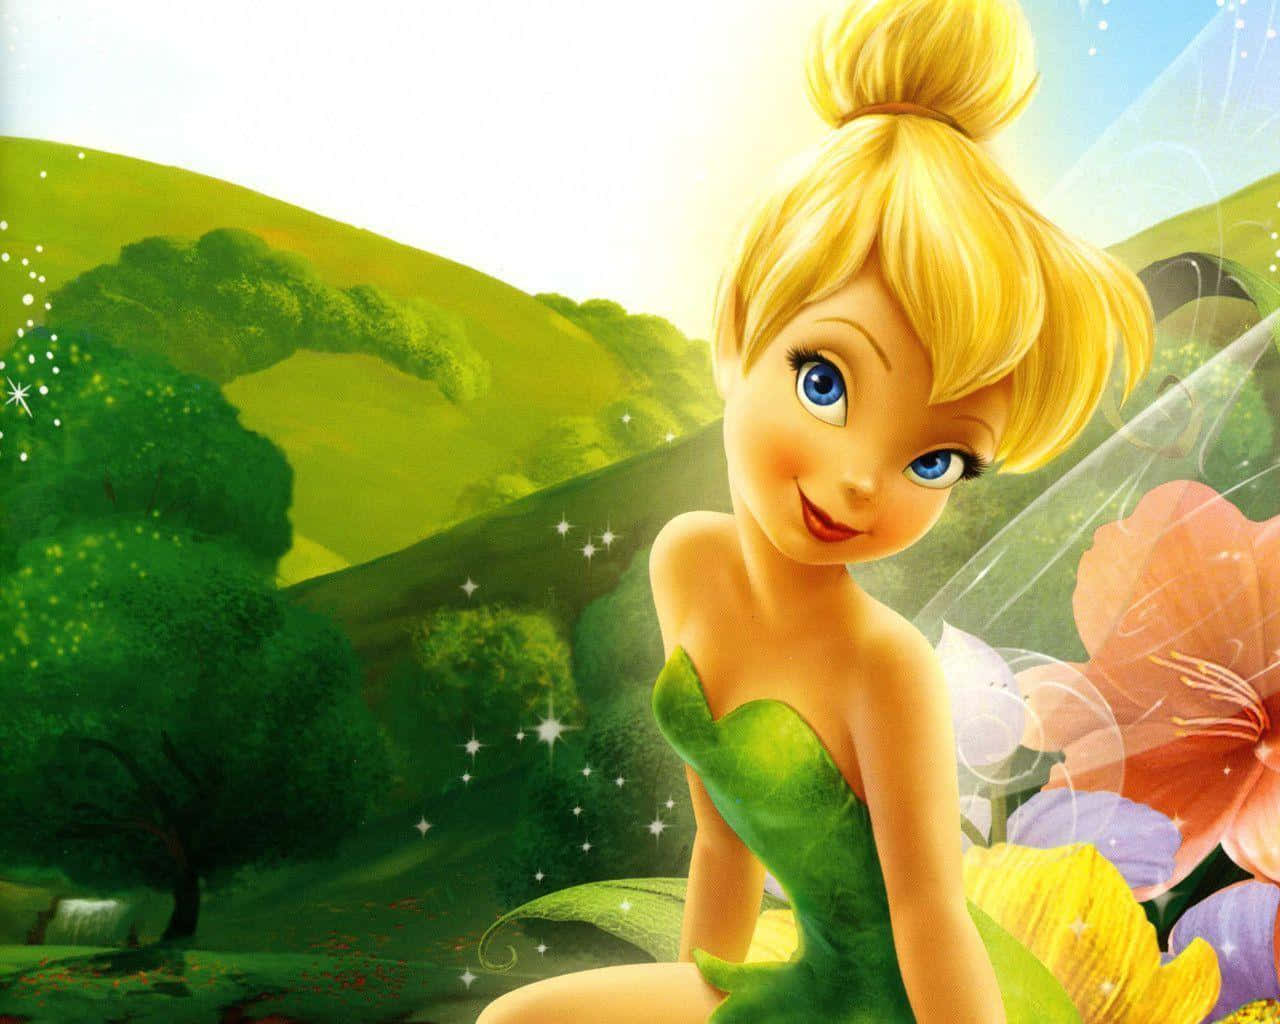 "Be your own Tinkerbell and sprinkle your own stardust"